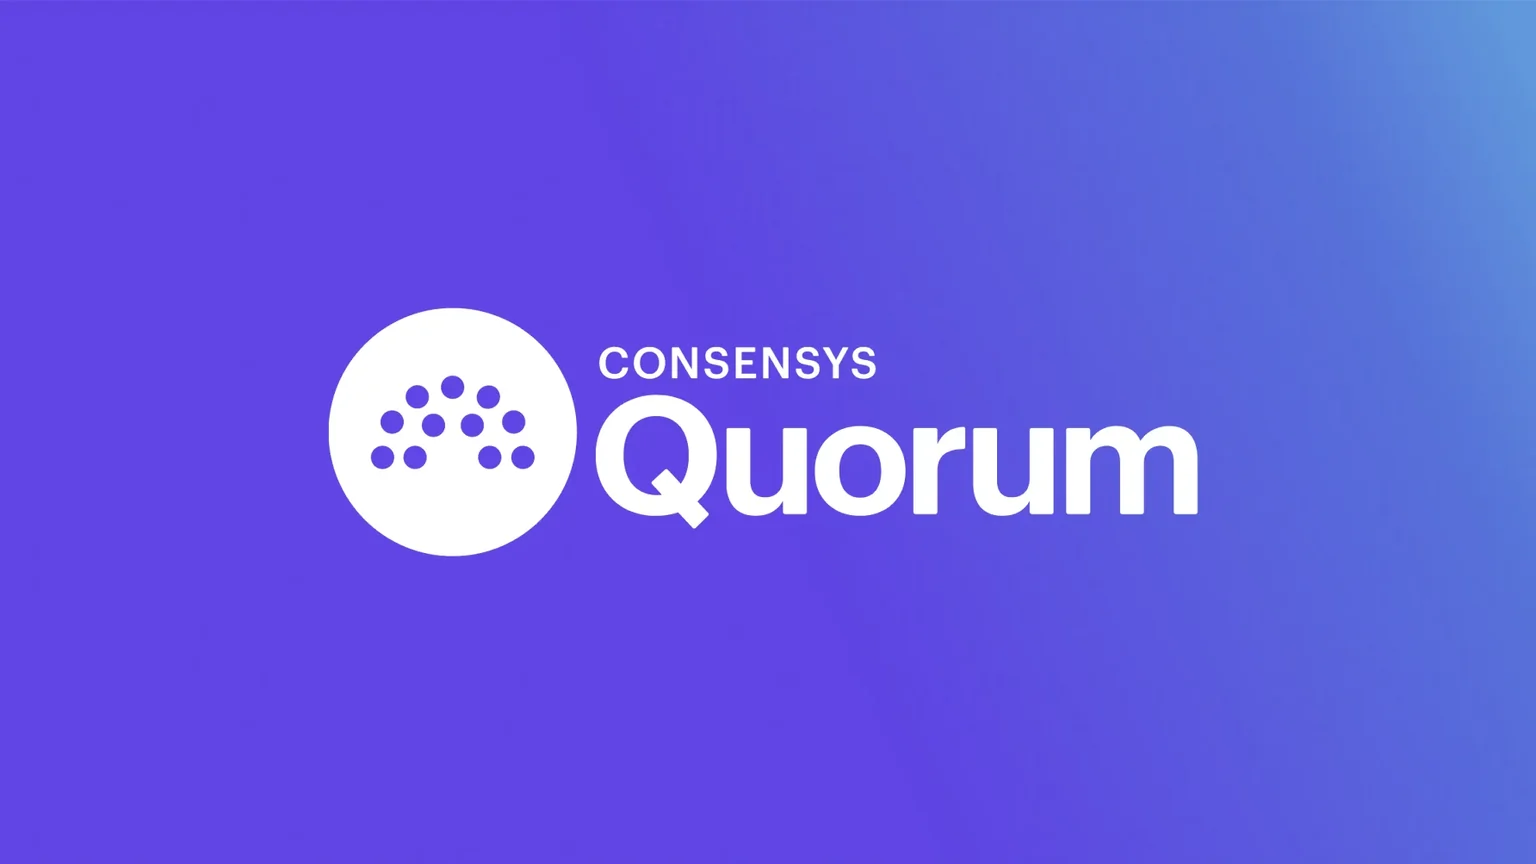 Quorum will remain an open-source platform under the new brand. Image: ConsenSys